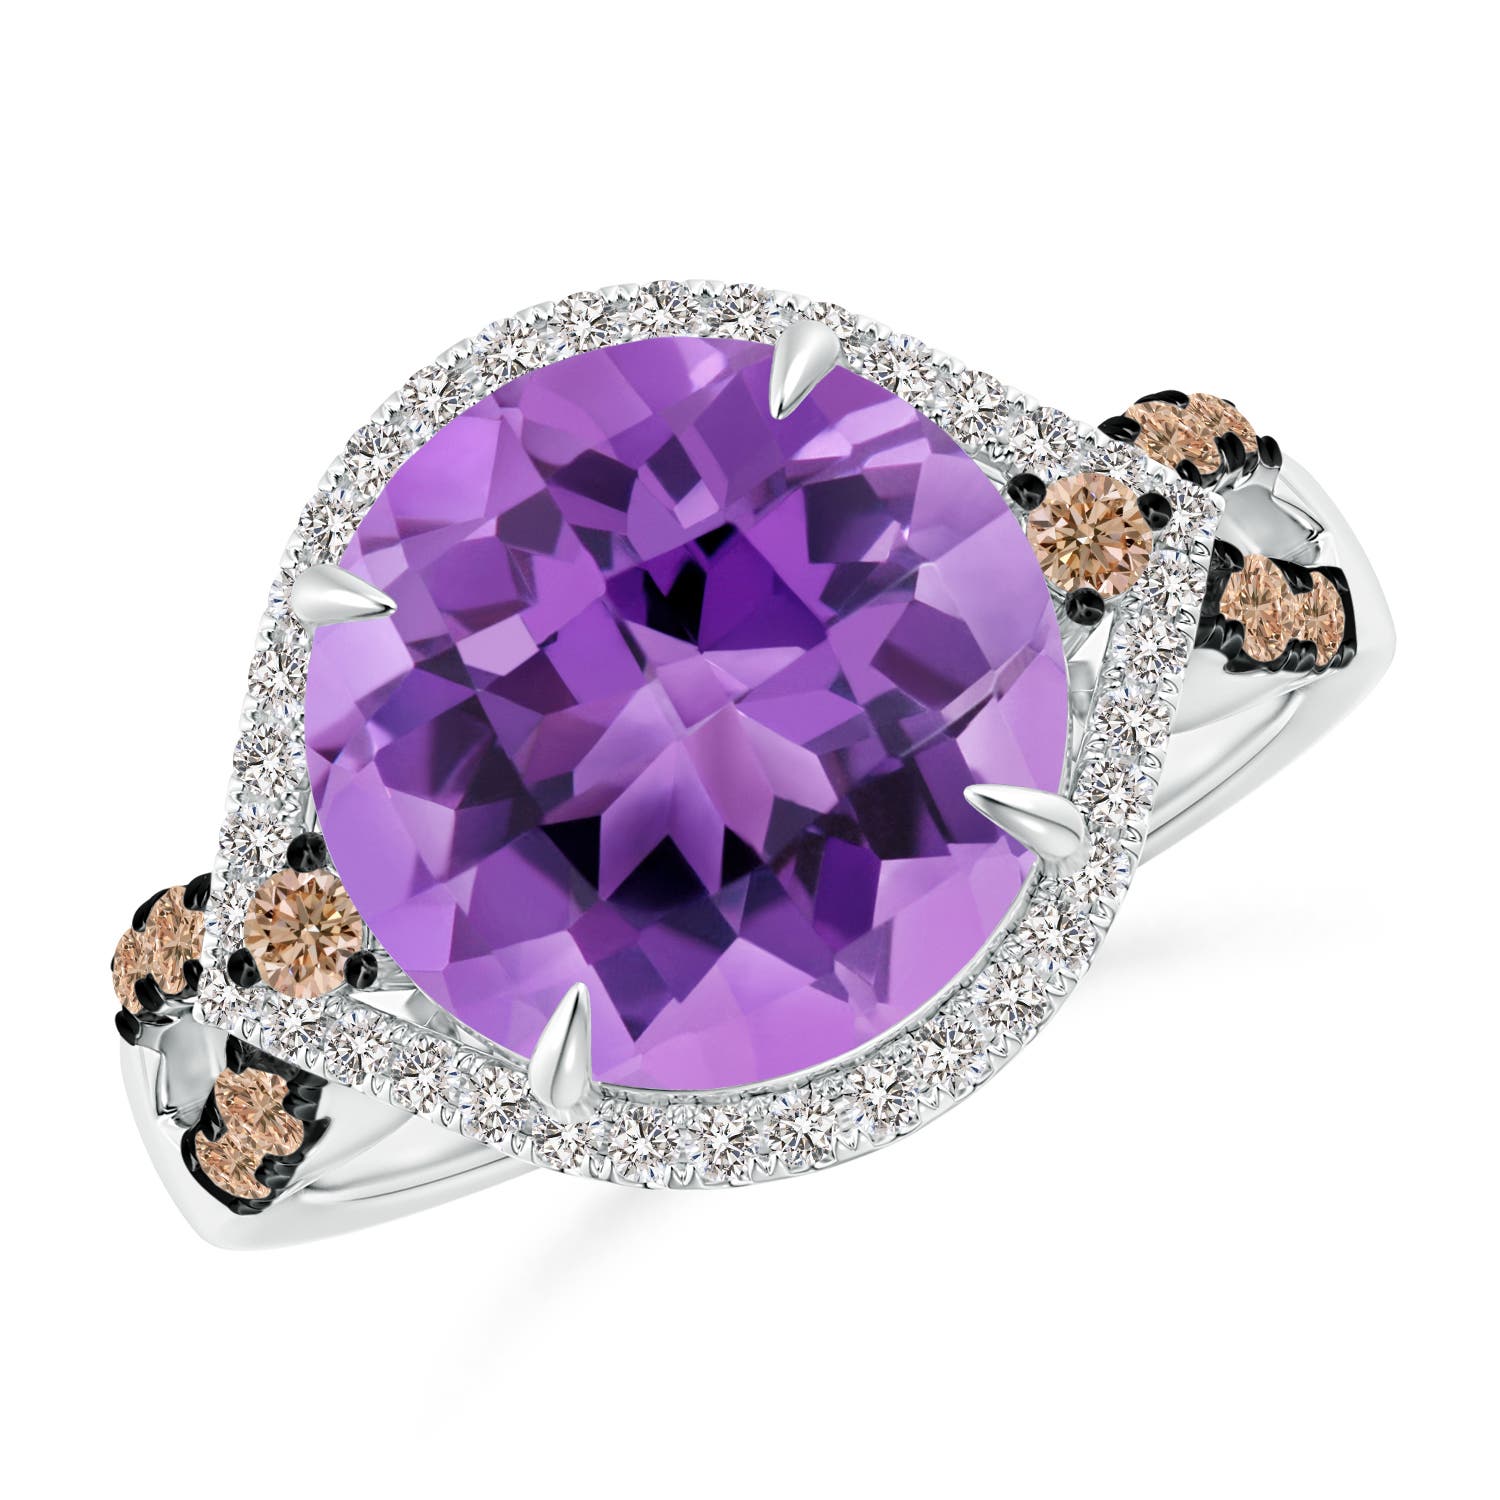 AA - Amethyst / 4.64 CT / 14 KT White Gold